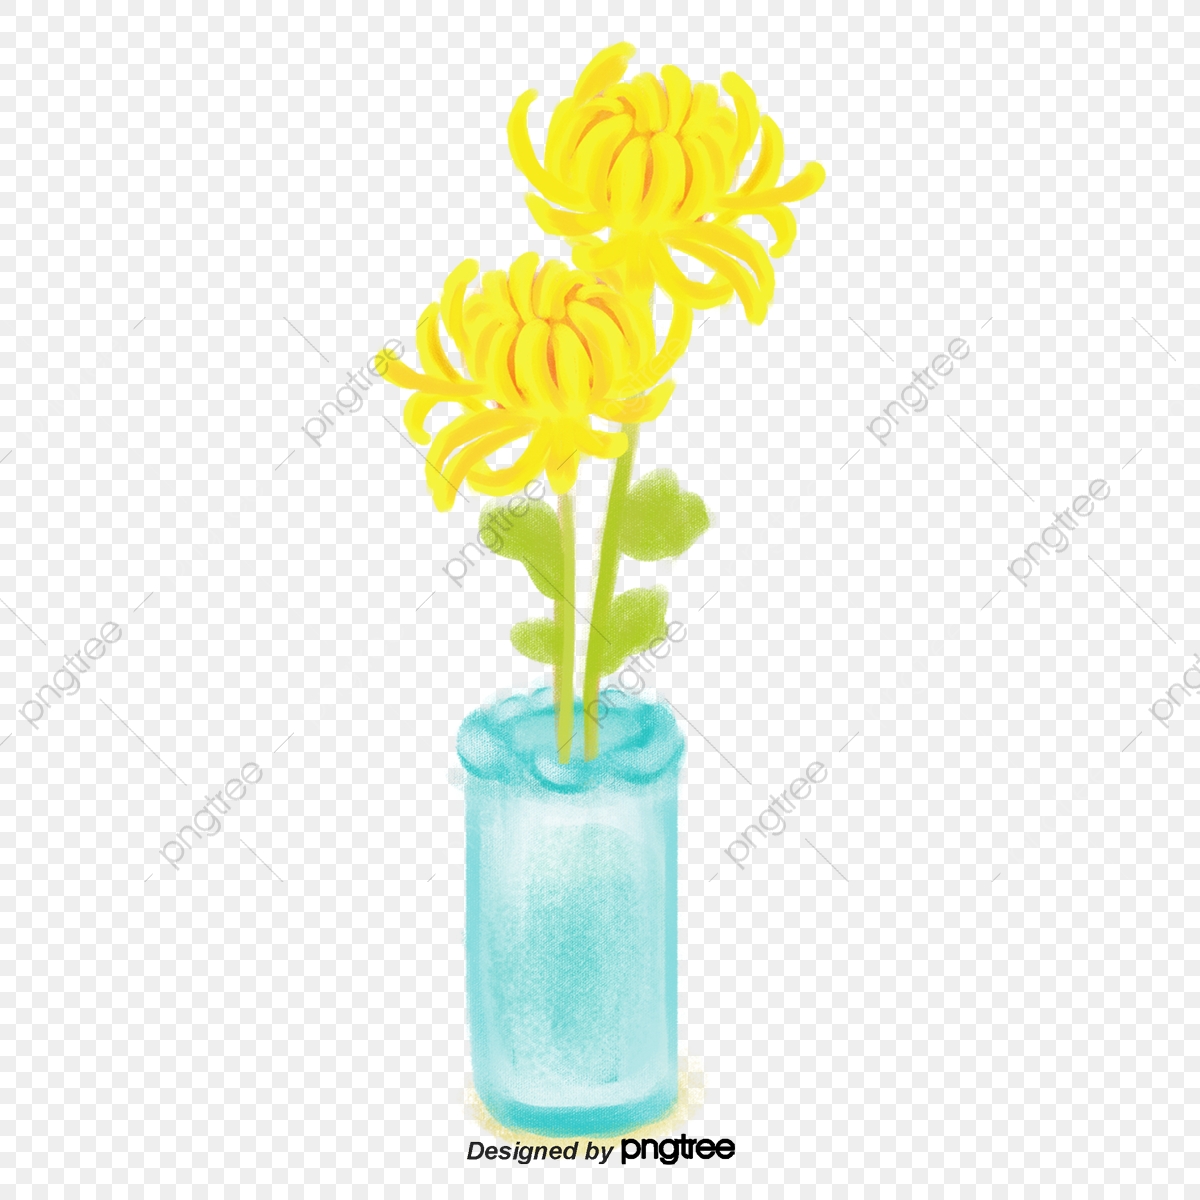 Vase clipart two flower. Chrysanthemums in a cartoon